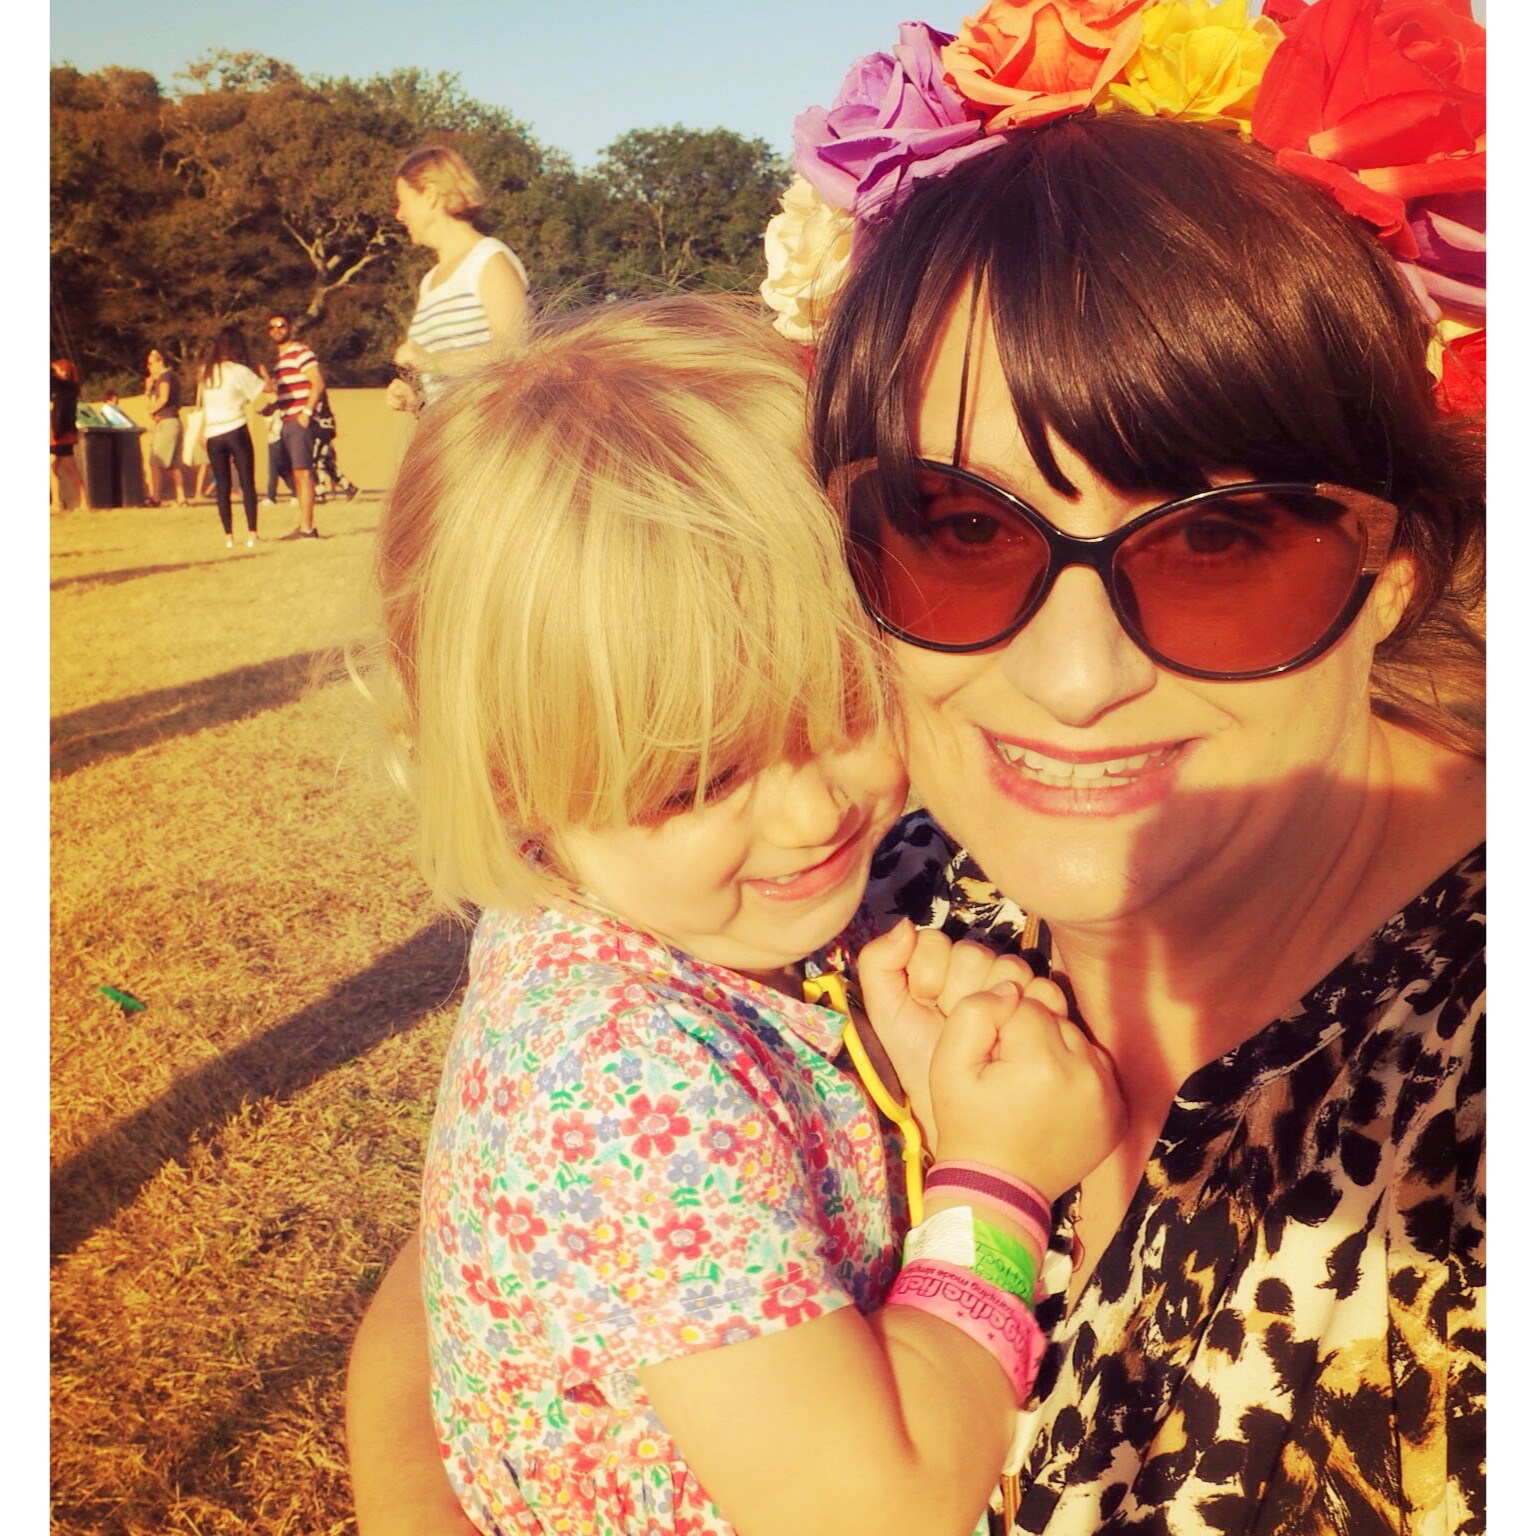 mamasVIB | V. I. BASH: An A-Z of our first Camp Bestival - Part Two | camp bestival | forest lulworth cattle | camp bestival review | festivals | family festival | camp bestiavl 2015 | festival | mamasVIb | ear defenders | what to pack for a festival | festival essentials | festival tips | a-z of festivals | get involved PR| weekend away | family weekend brummymummyof2 | youbbymemummy | the twinkle diaries | bloggers | weekend away | mothercare | clothes | fashion | kids style | festival fashion | festival fashion essentials | what to take to a festival | a-z | bonita turner